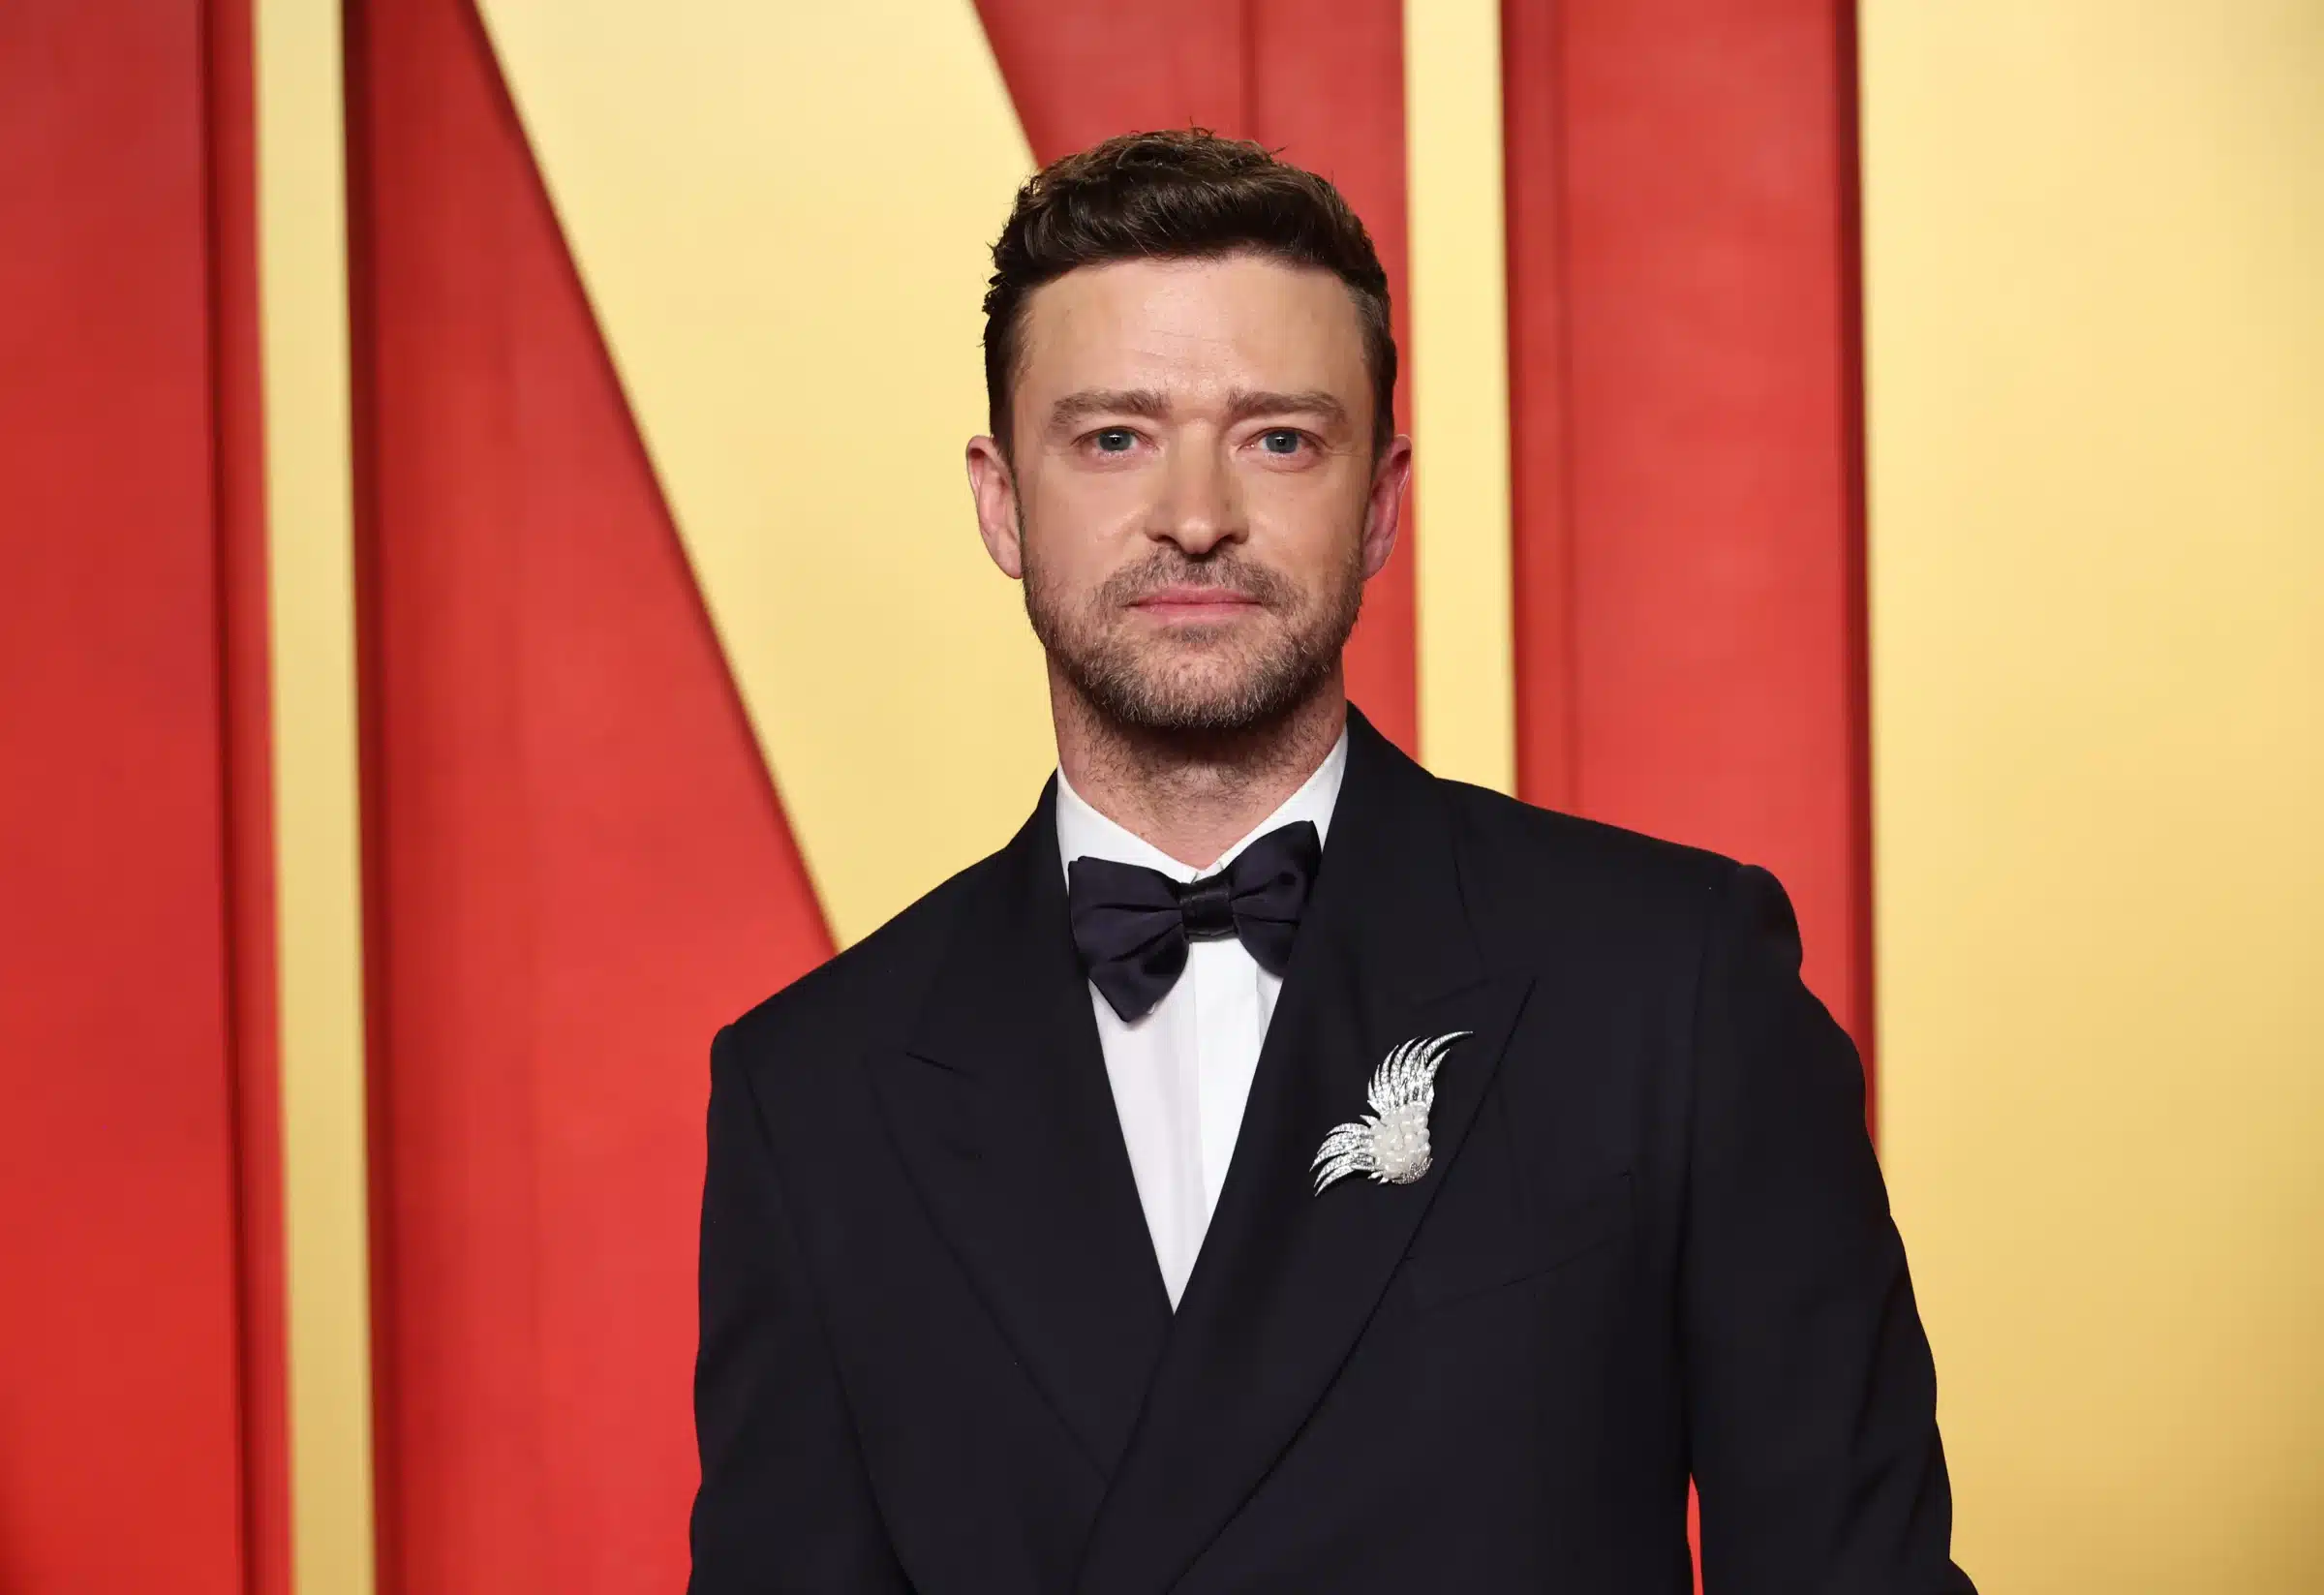 A man with short, brown hair and a trimmed beard is dressed in a formal black suit with a black bow tie and a white bird-shaped brooch. He stands against a red and yellow geometric background, looking directly at the camera.